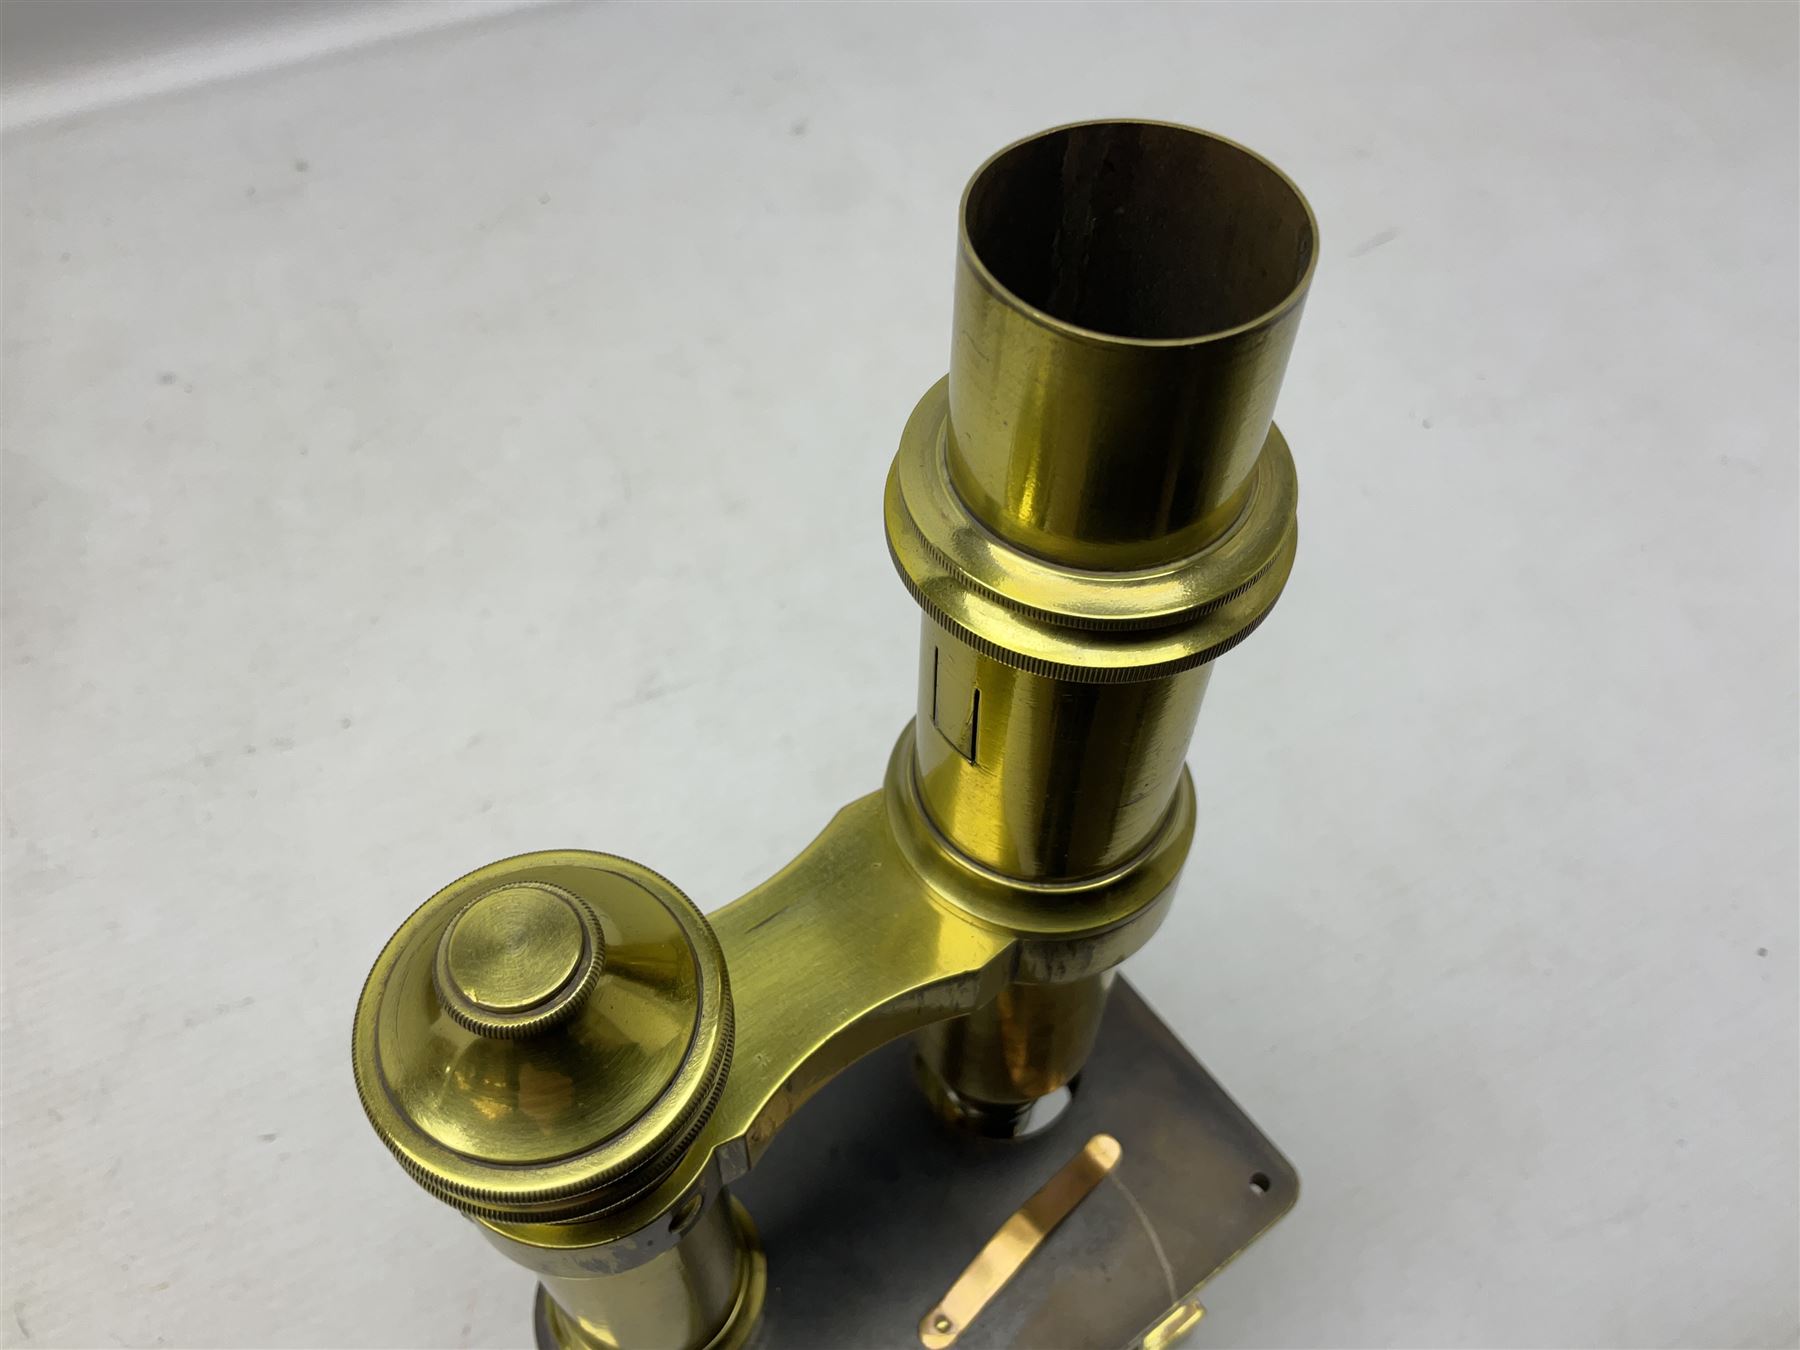 19th century brass monocular microscope by R. & J. Beck London No.18760 with hinged column and pitch - Image 5 of 12